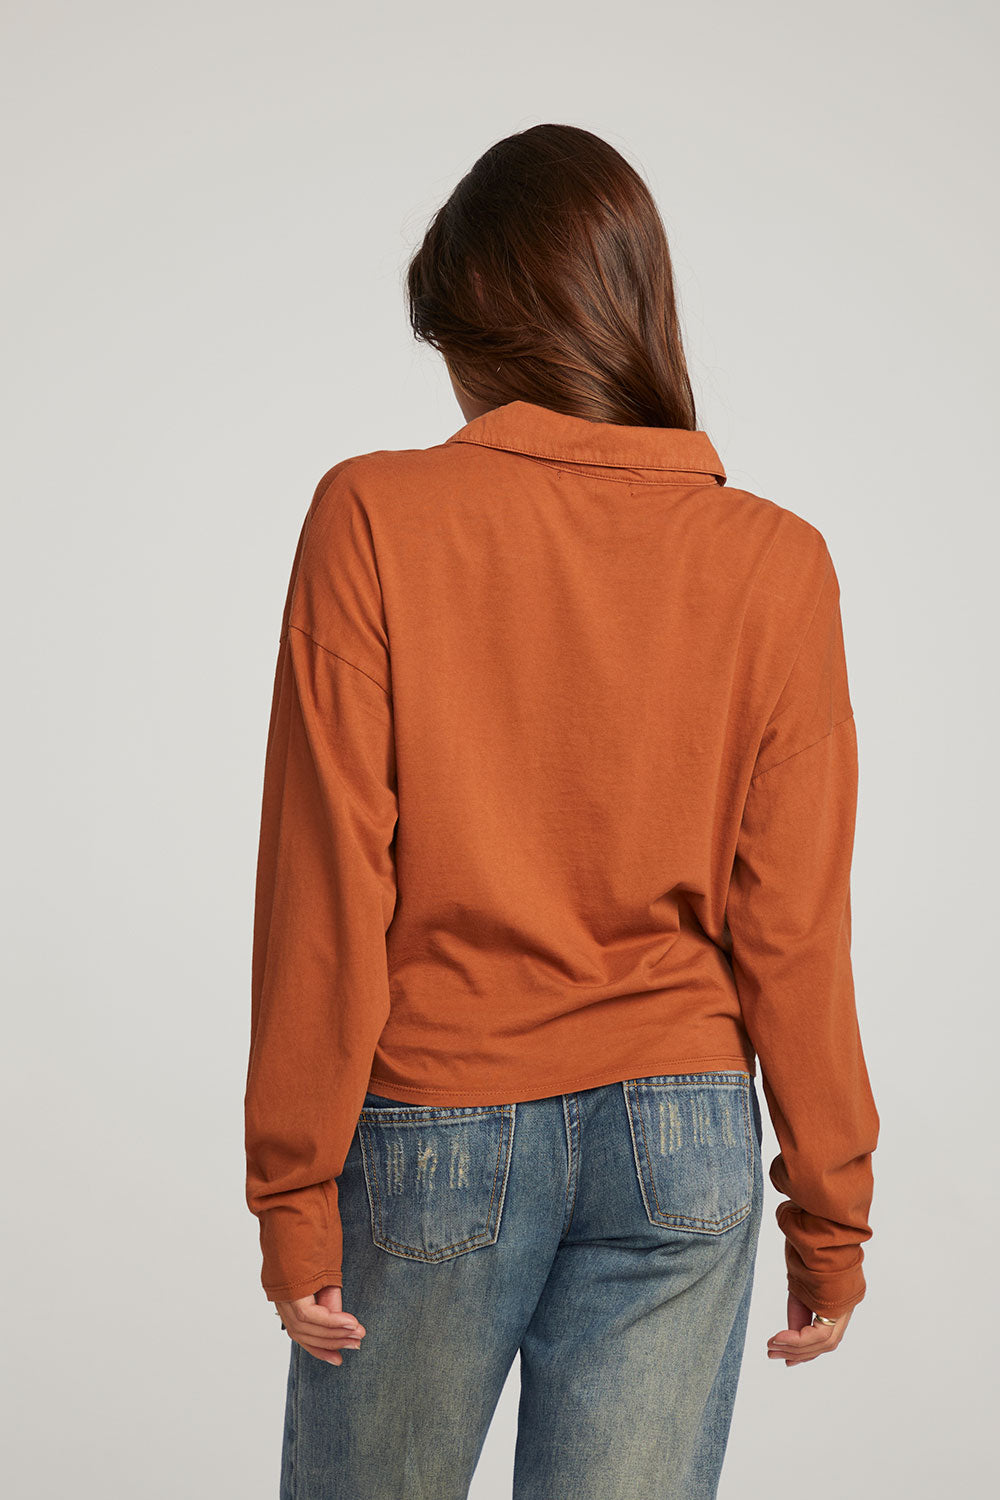 Miles Whiskey Long Sleeve WOMENS chaserbrand